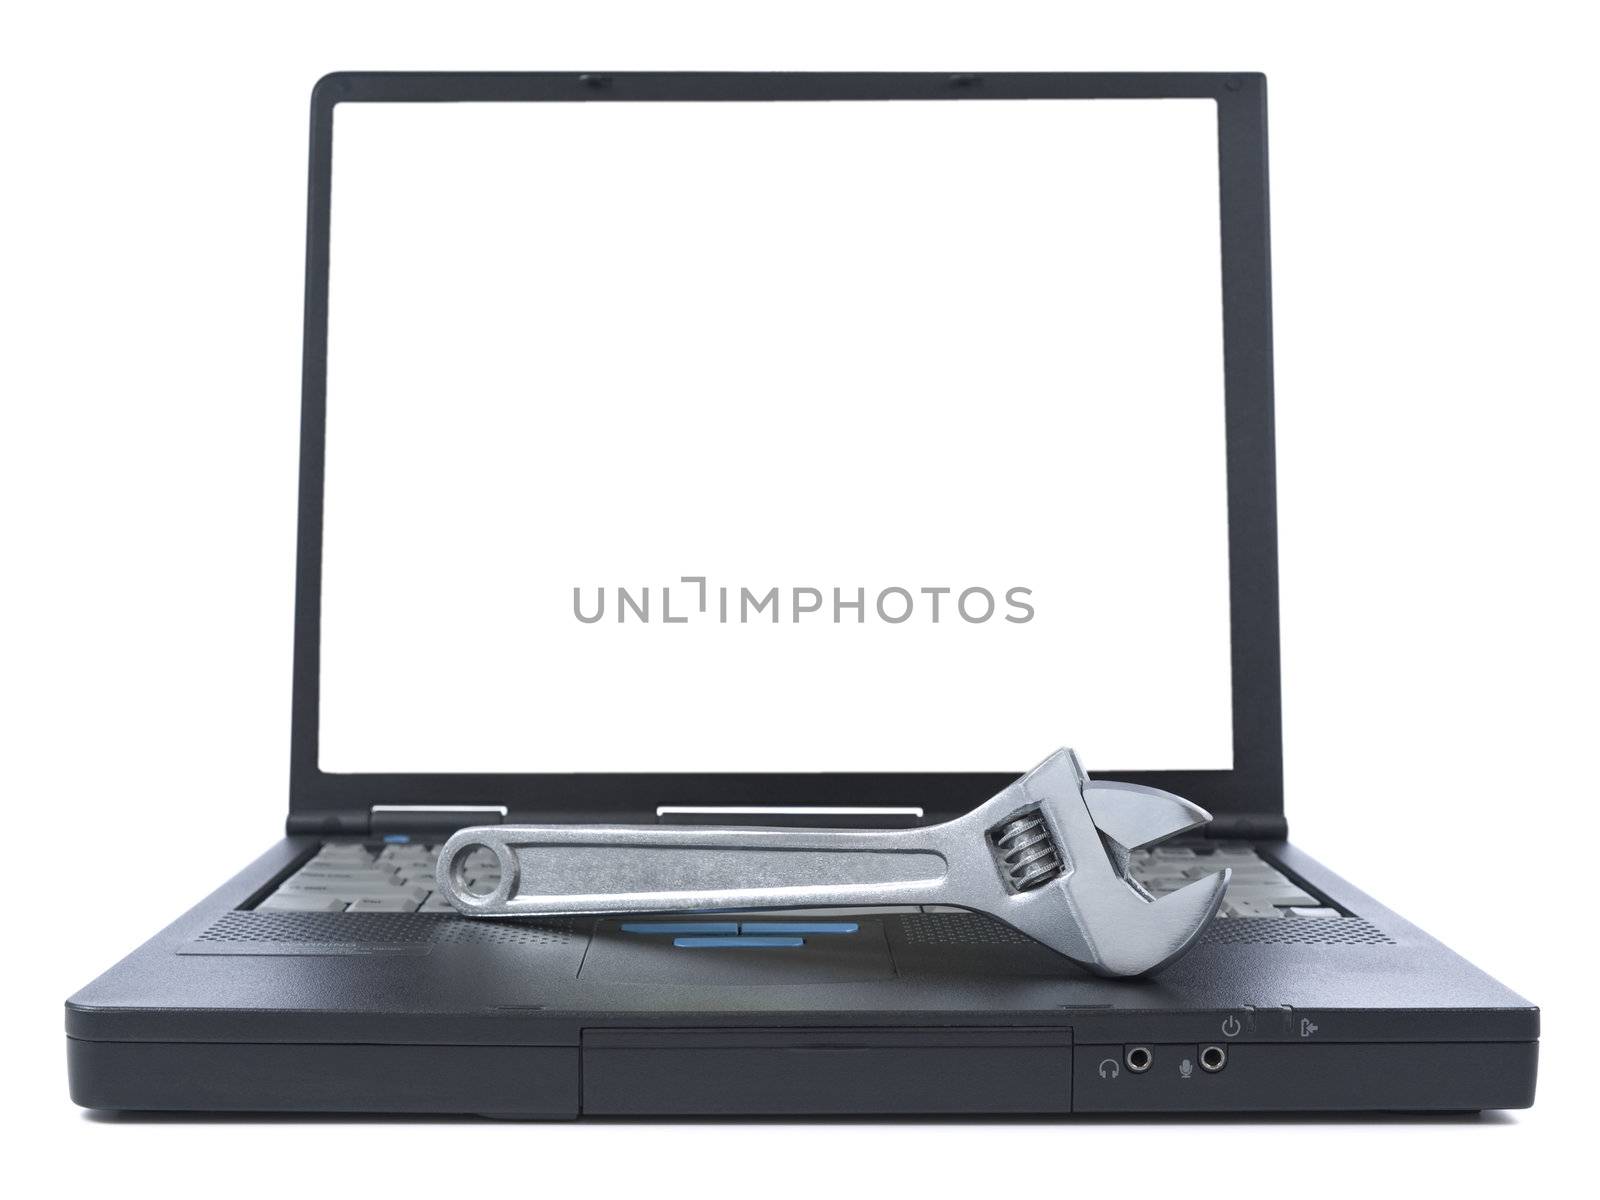 A spanner over a black laptop isolated over white background. White copy space on screen.